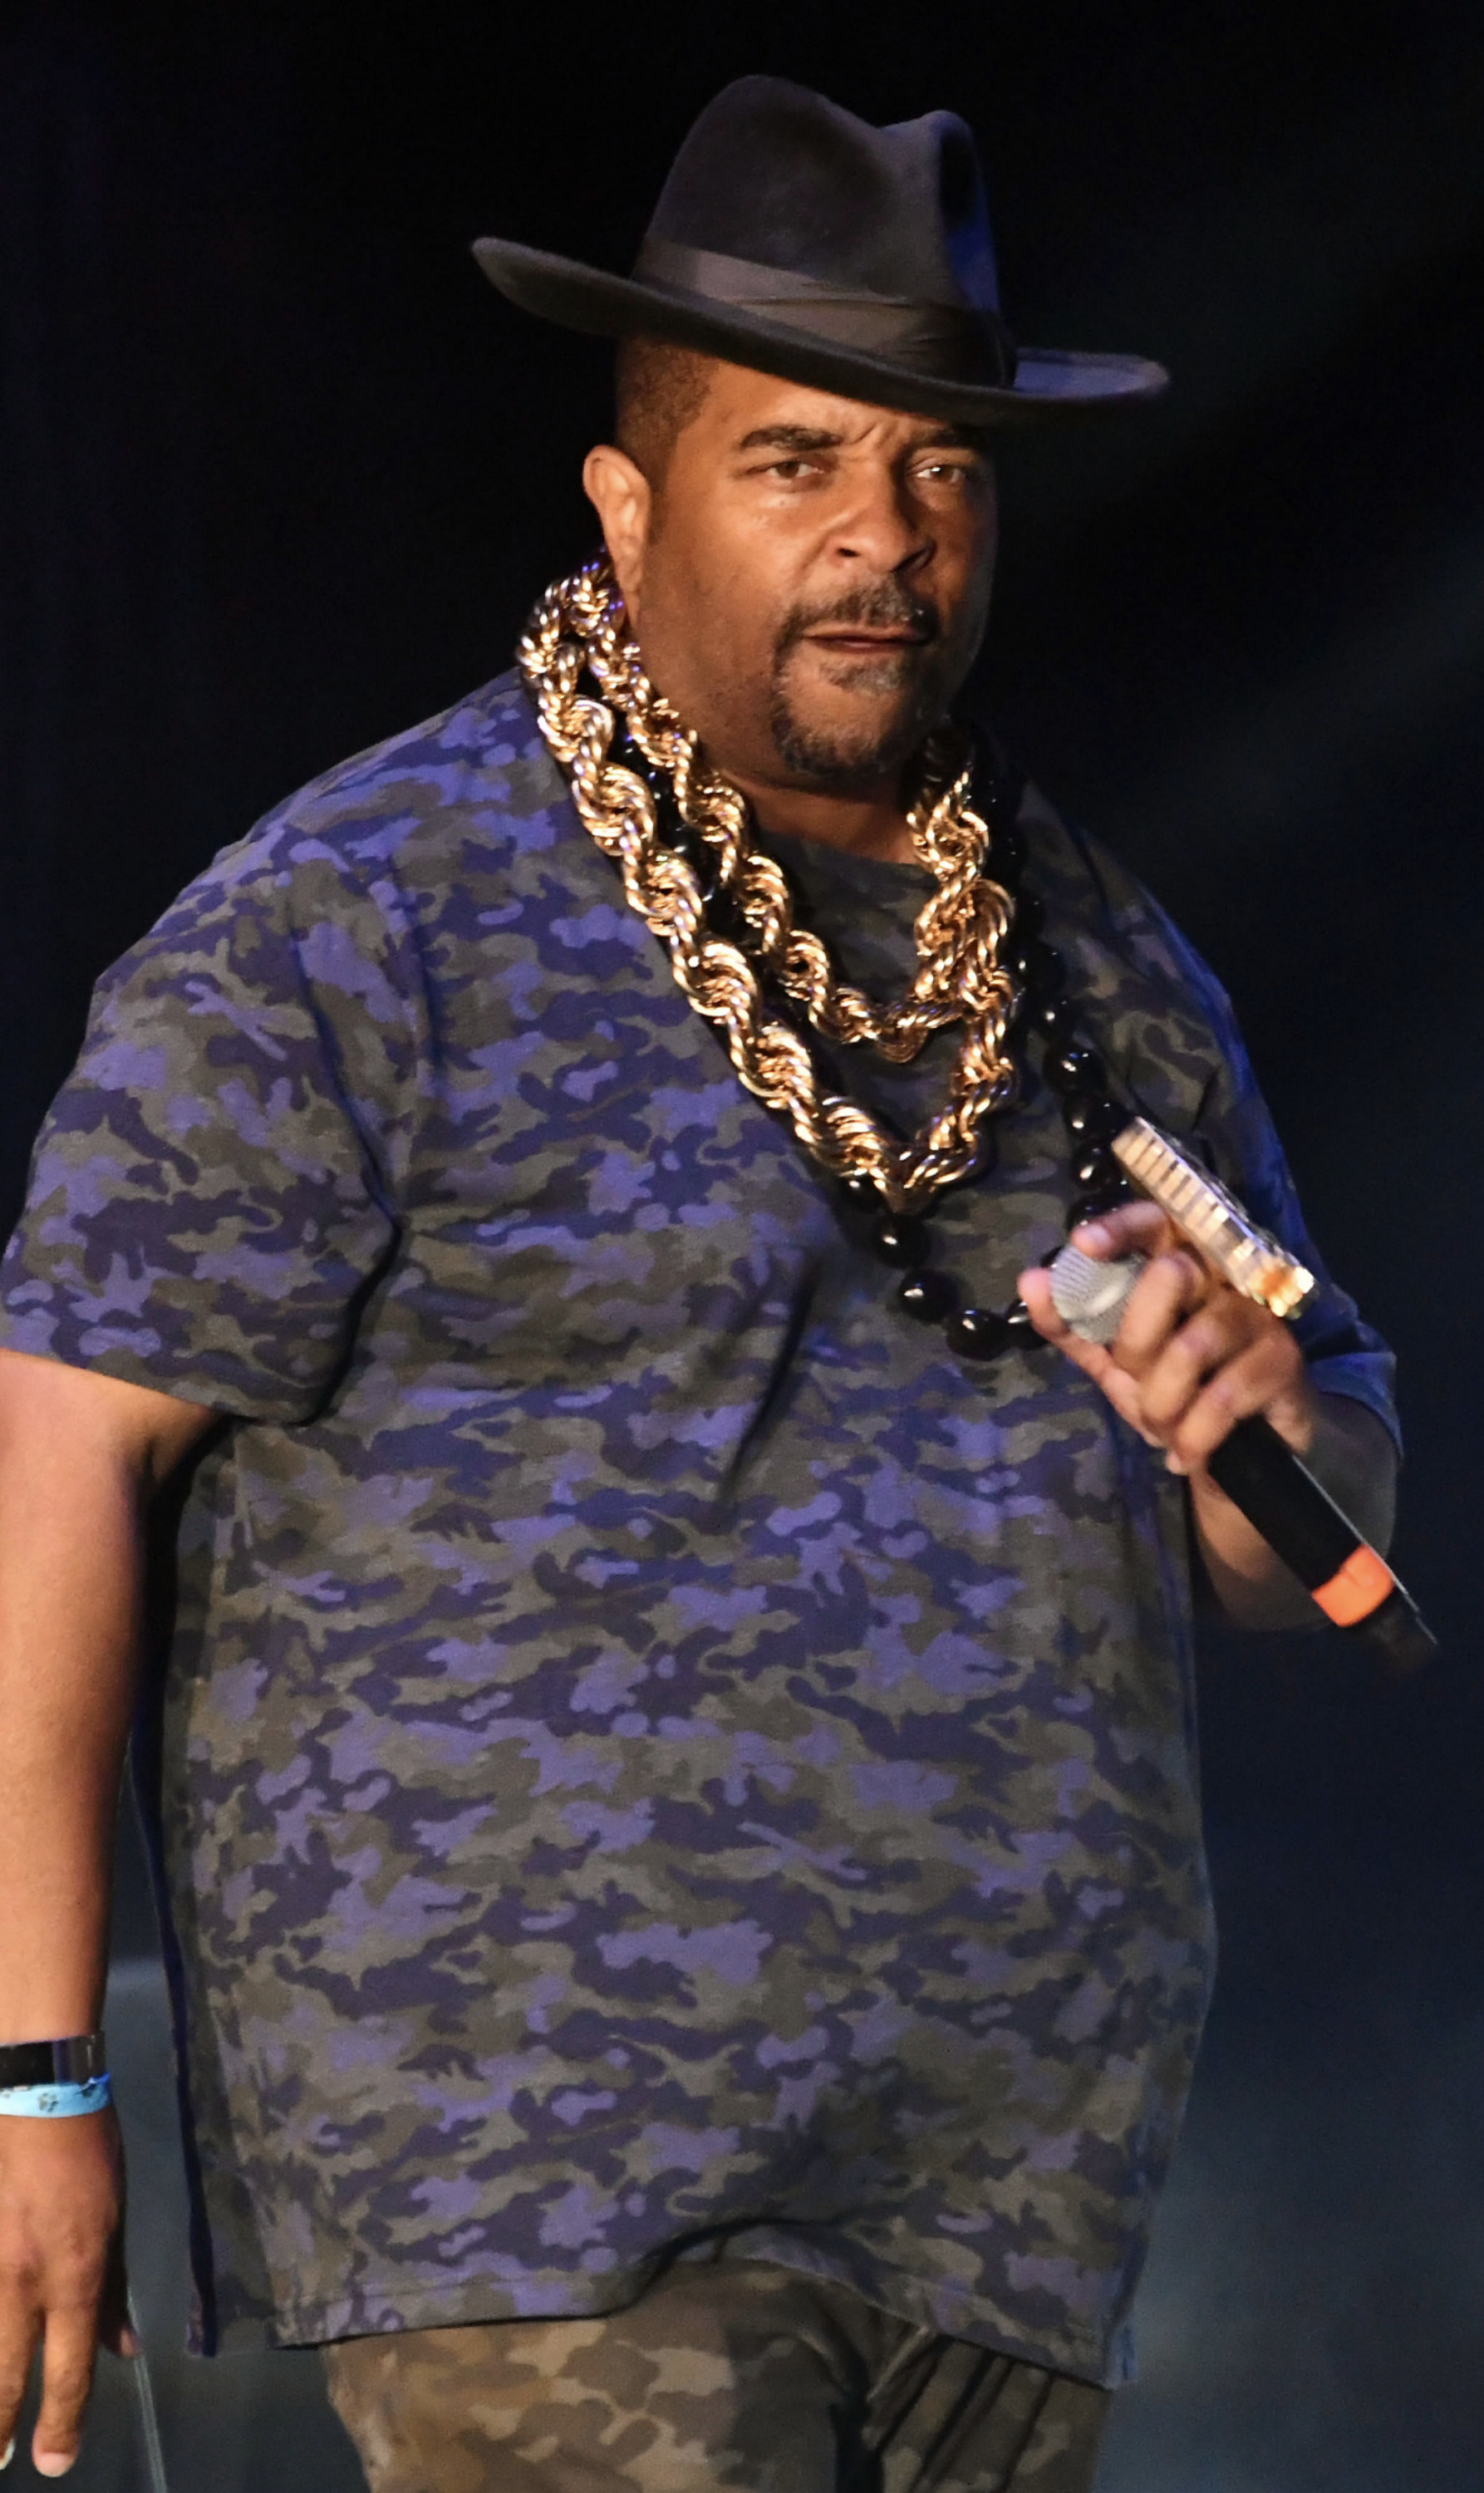 Sir Mix-a-Lot performing on stage in California